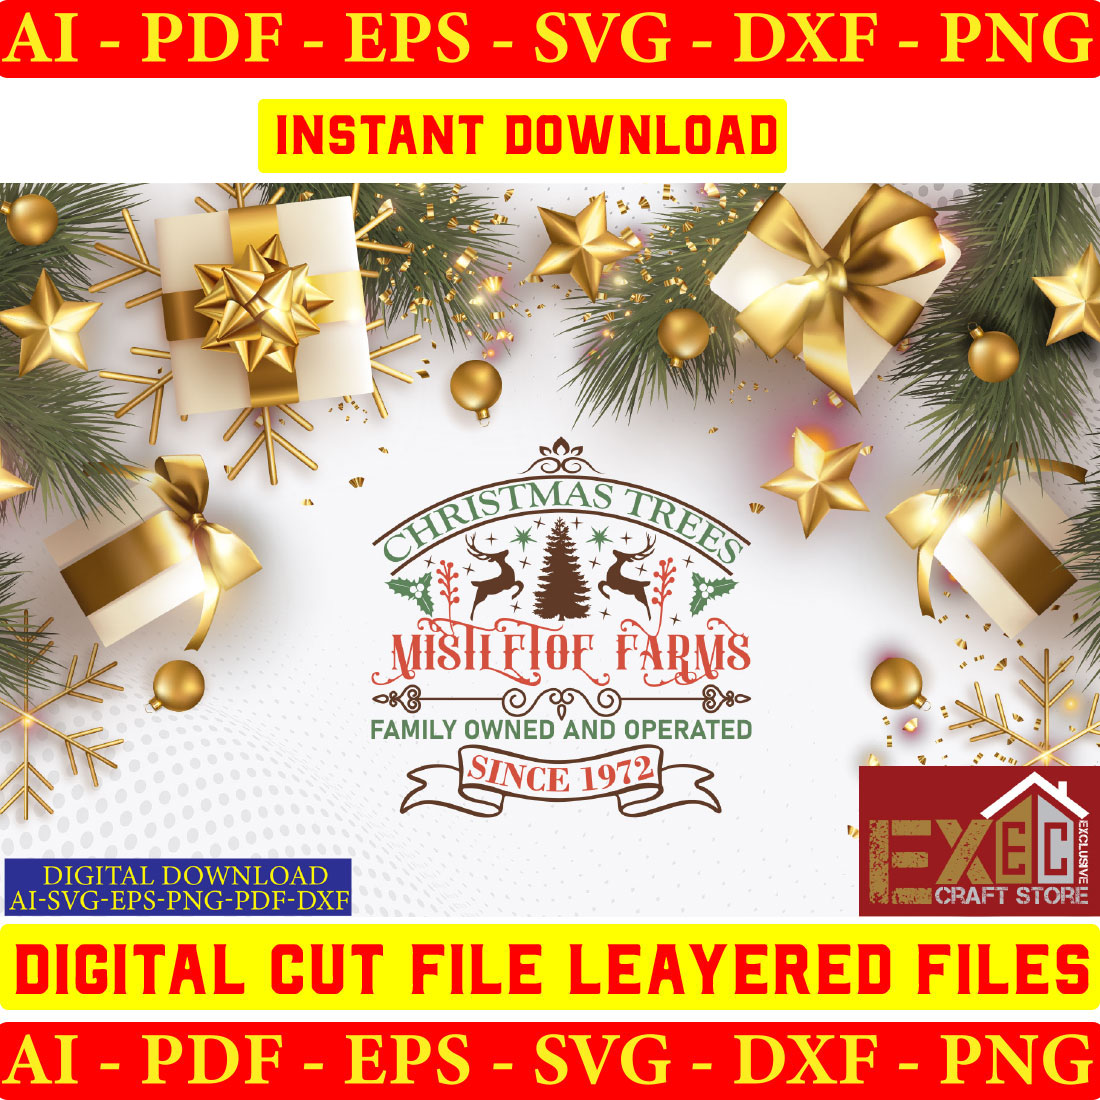 Digital cut file layered files for christmas.